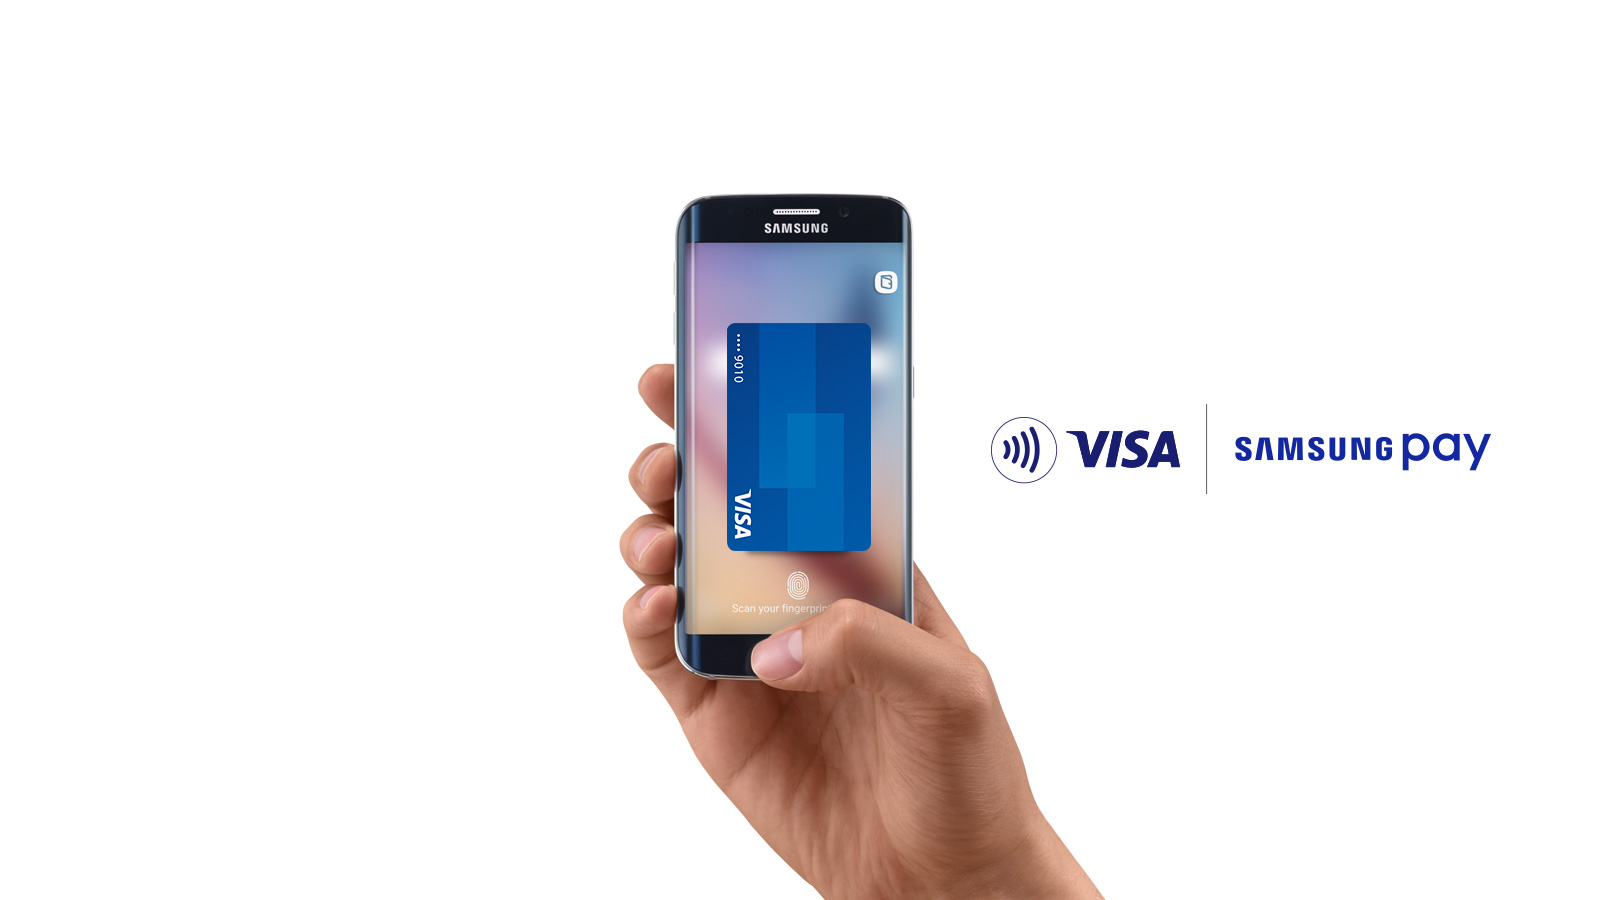 Contactless symbol, Visa Samsung Pay logo, hand holding Samsung smart phone with an image of a Visa card on the display.